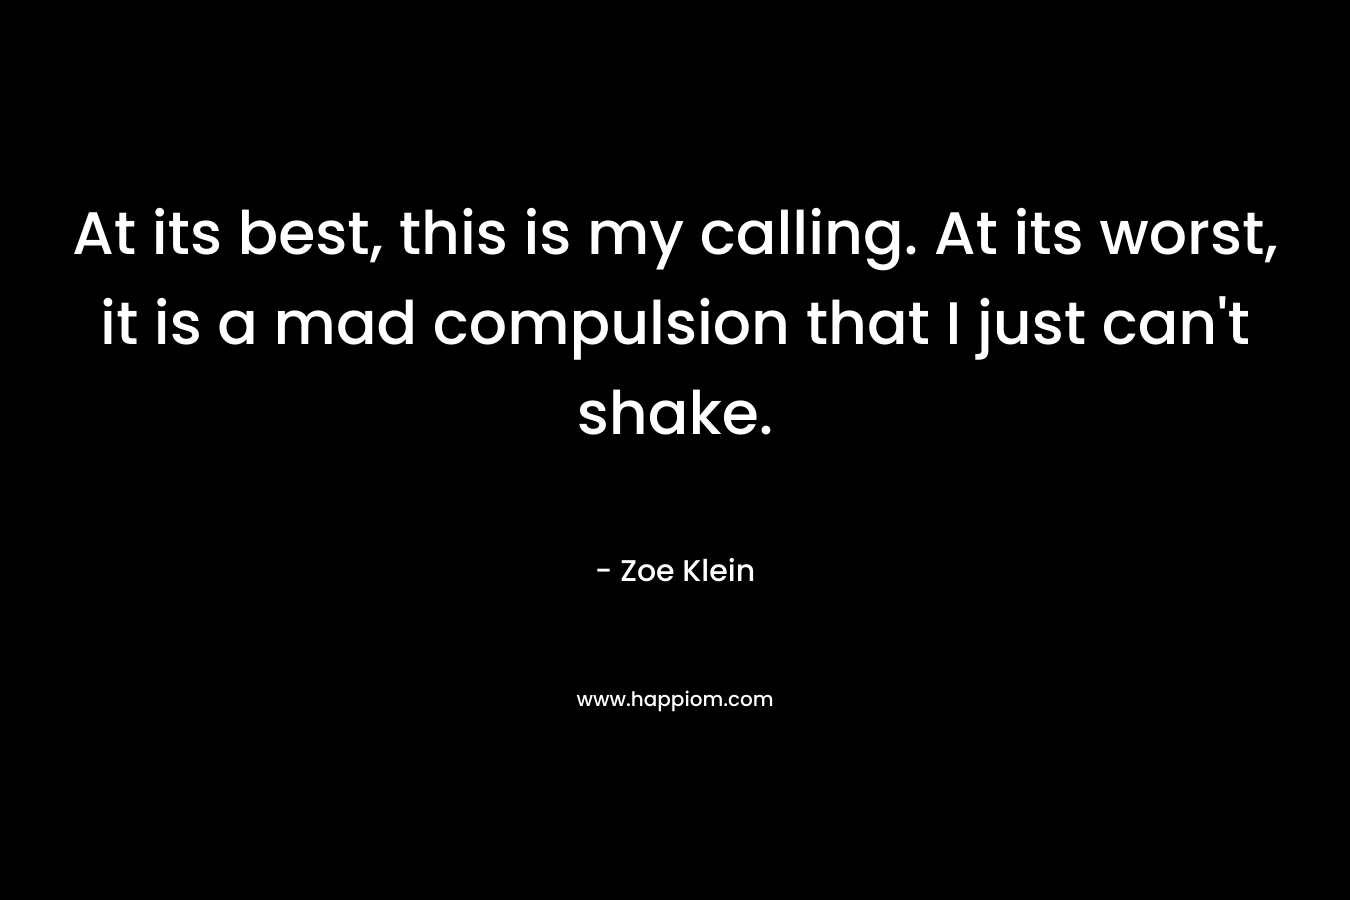 At its best, this is my calling. At its worst, it is a mad compulsion that I just can’t shake. – Zoe Klein